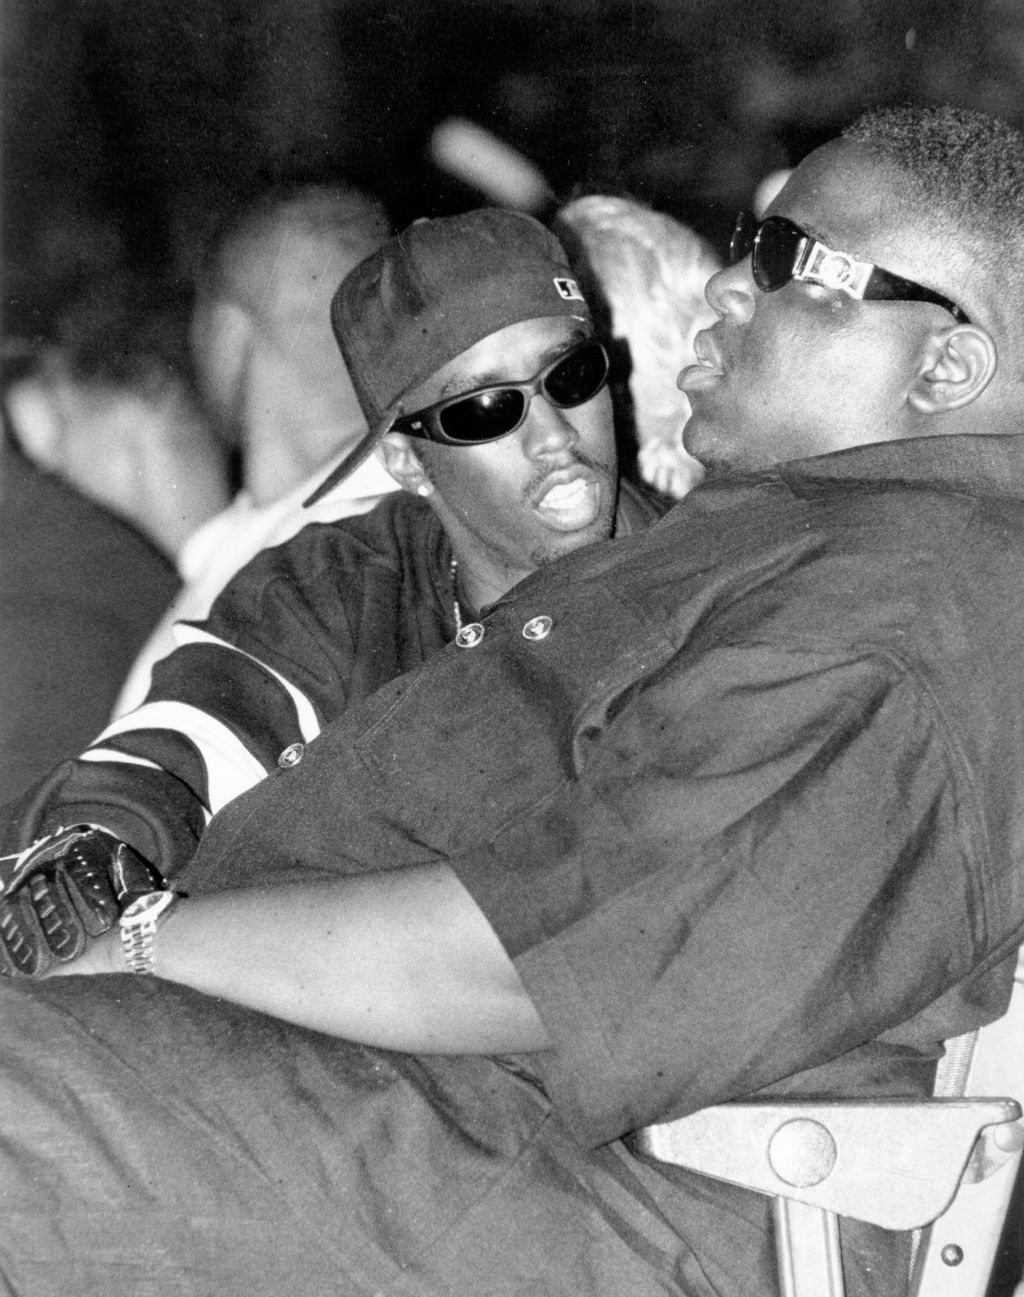 P Diddy and Biggie Smalls at the 1995 Source Awards